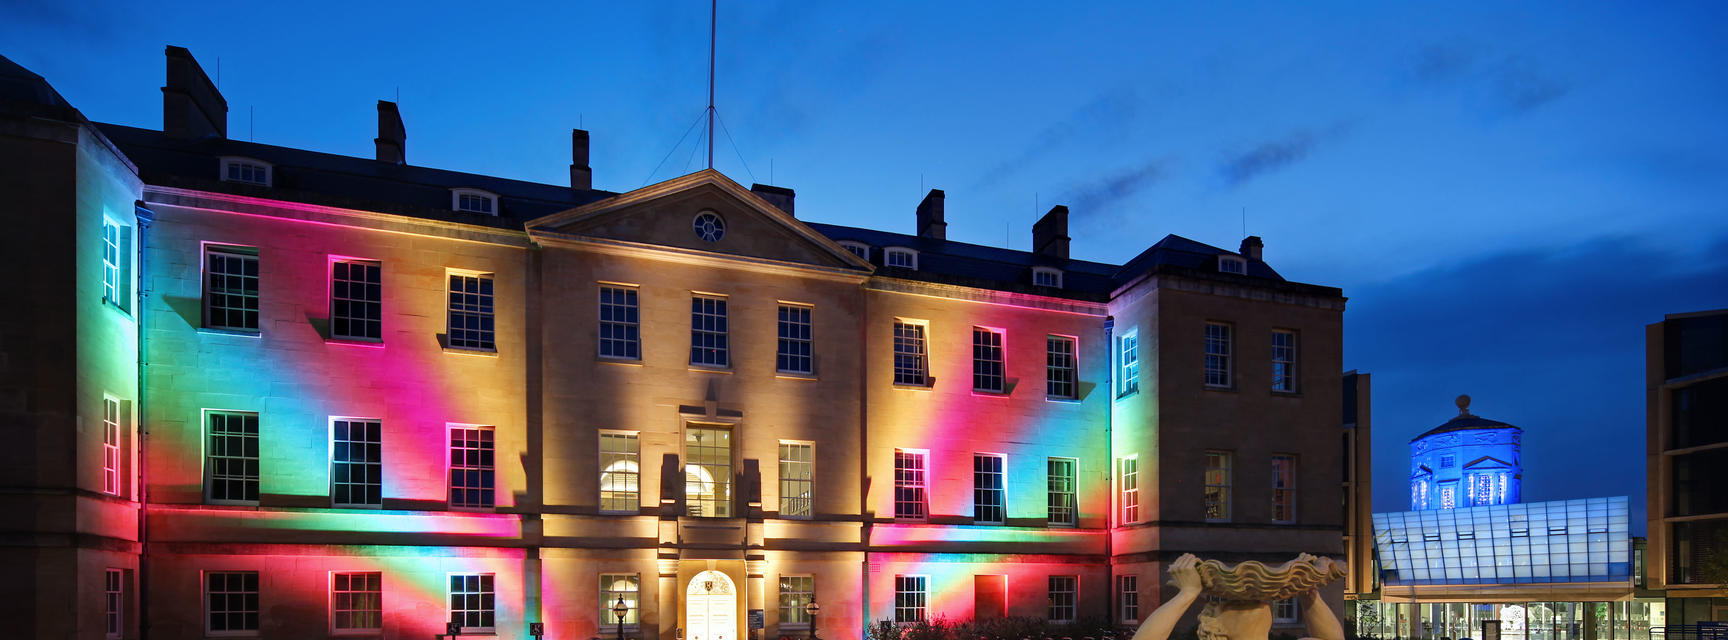 Radcliffe Humanities Building at night with rainbow lights projected on to it